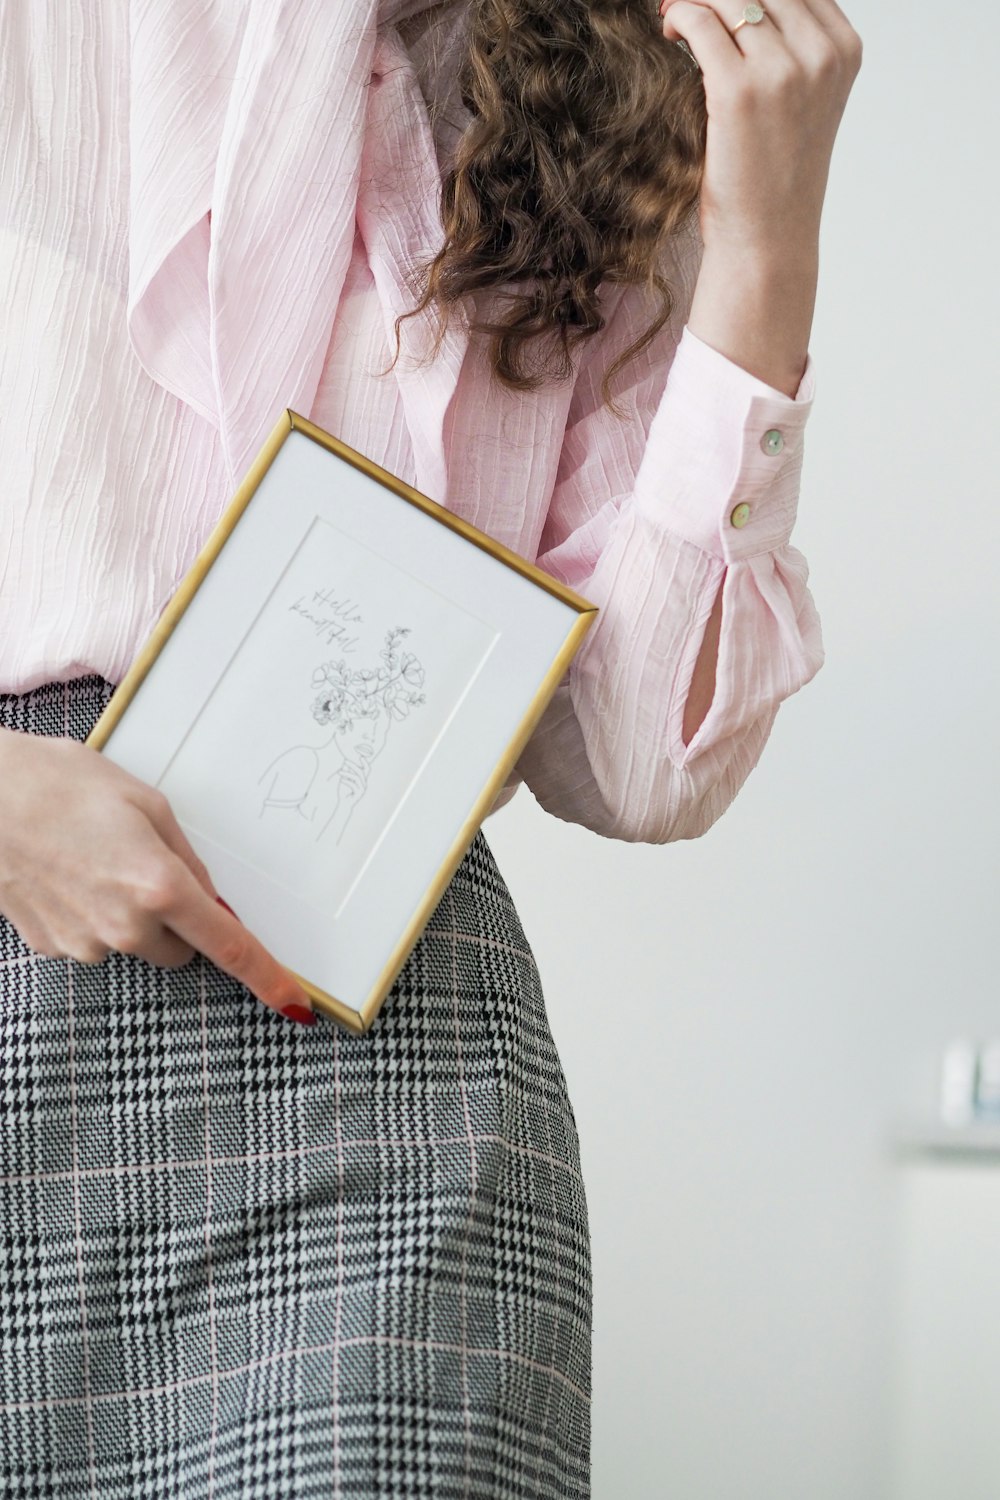 a person holding a drawing